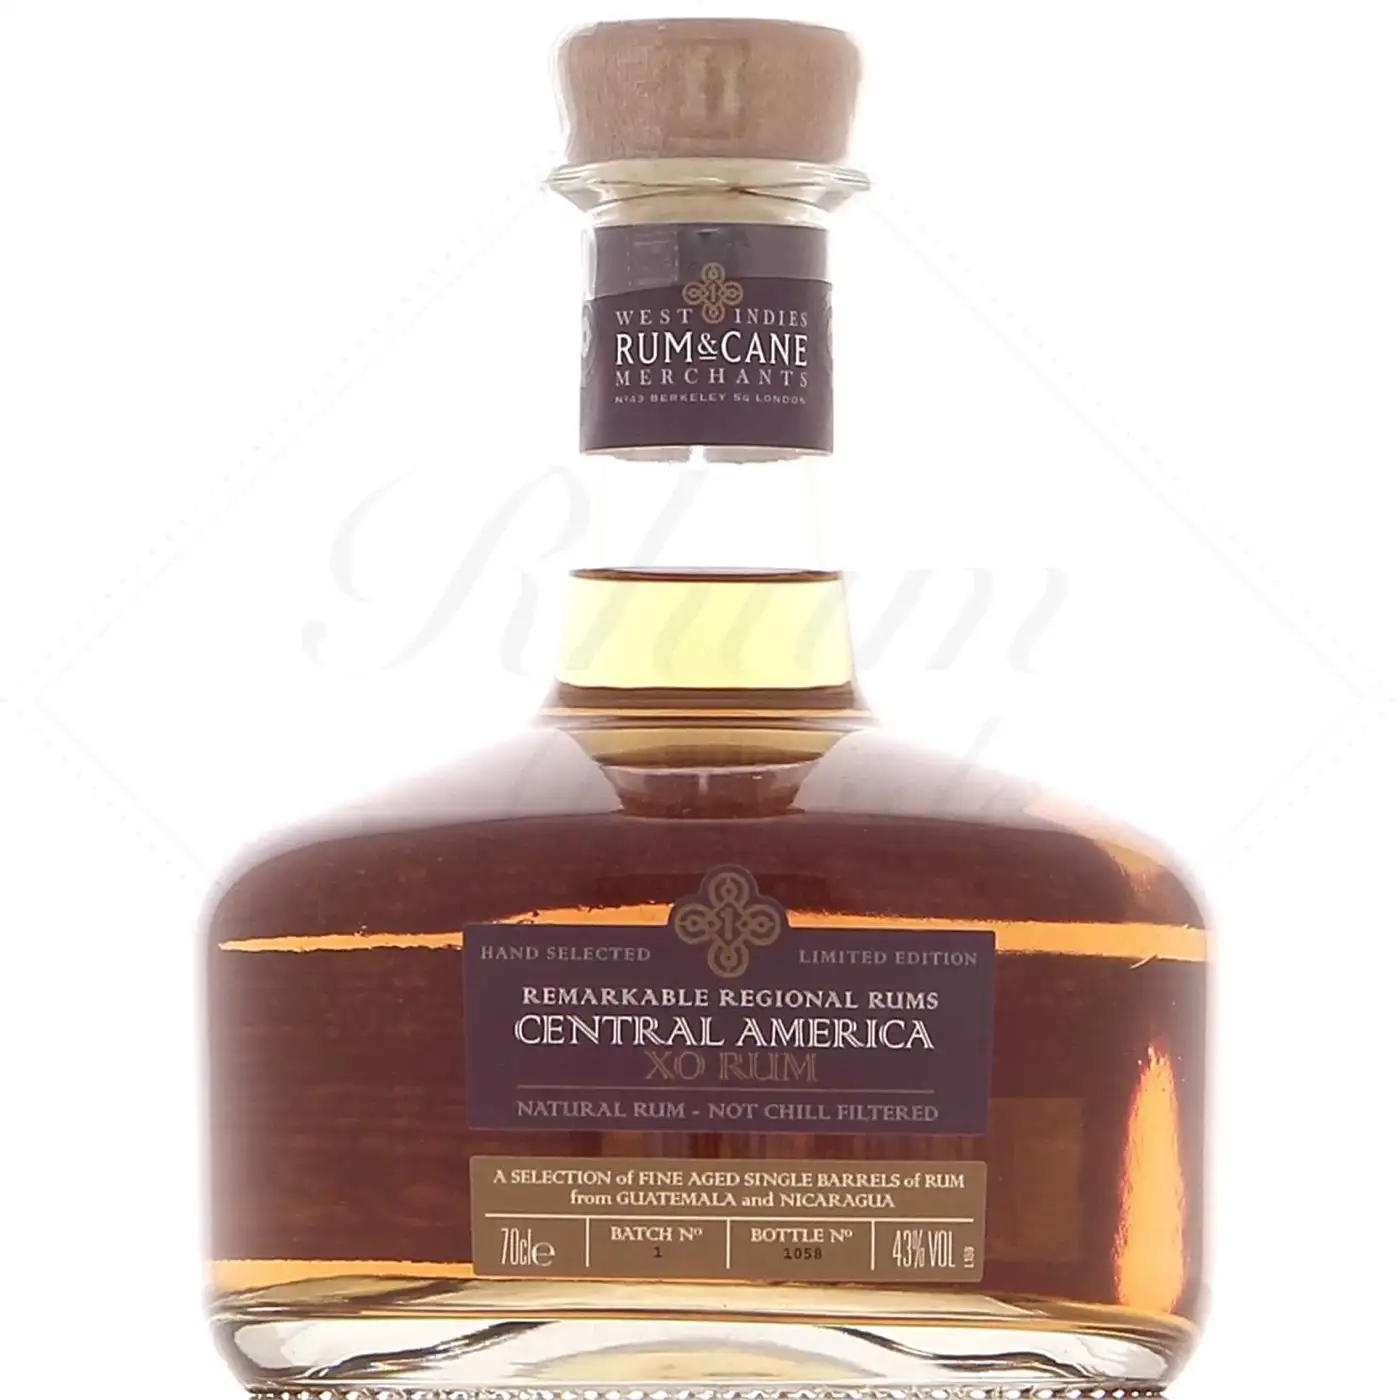 Image of the front of the bottle of the rum Rum & Cane Central America XO